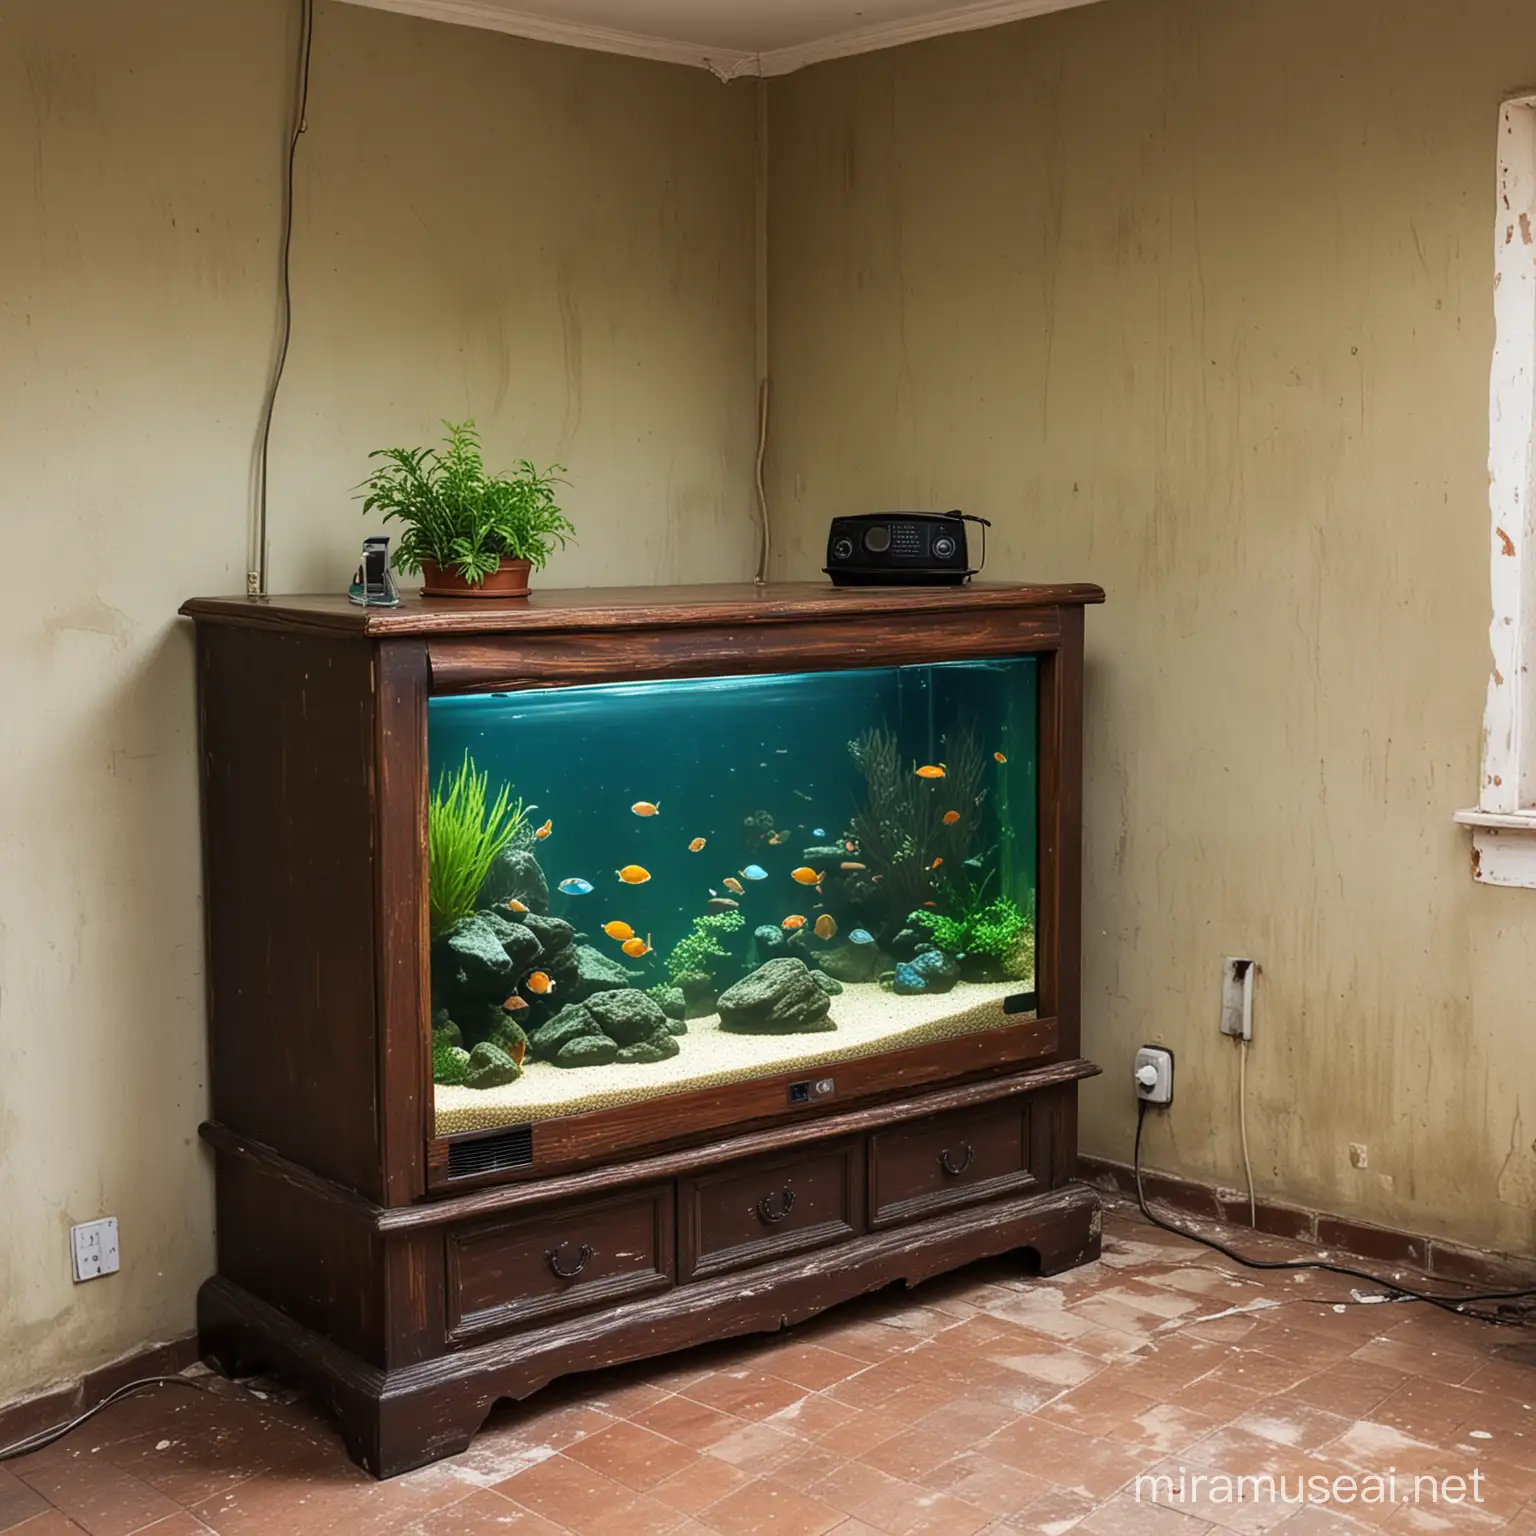 Vintage Televisionshaped Fish Tank in Tranquil Old House Setting